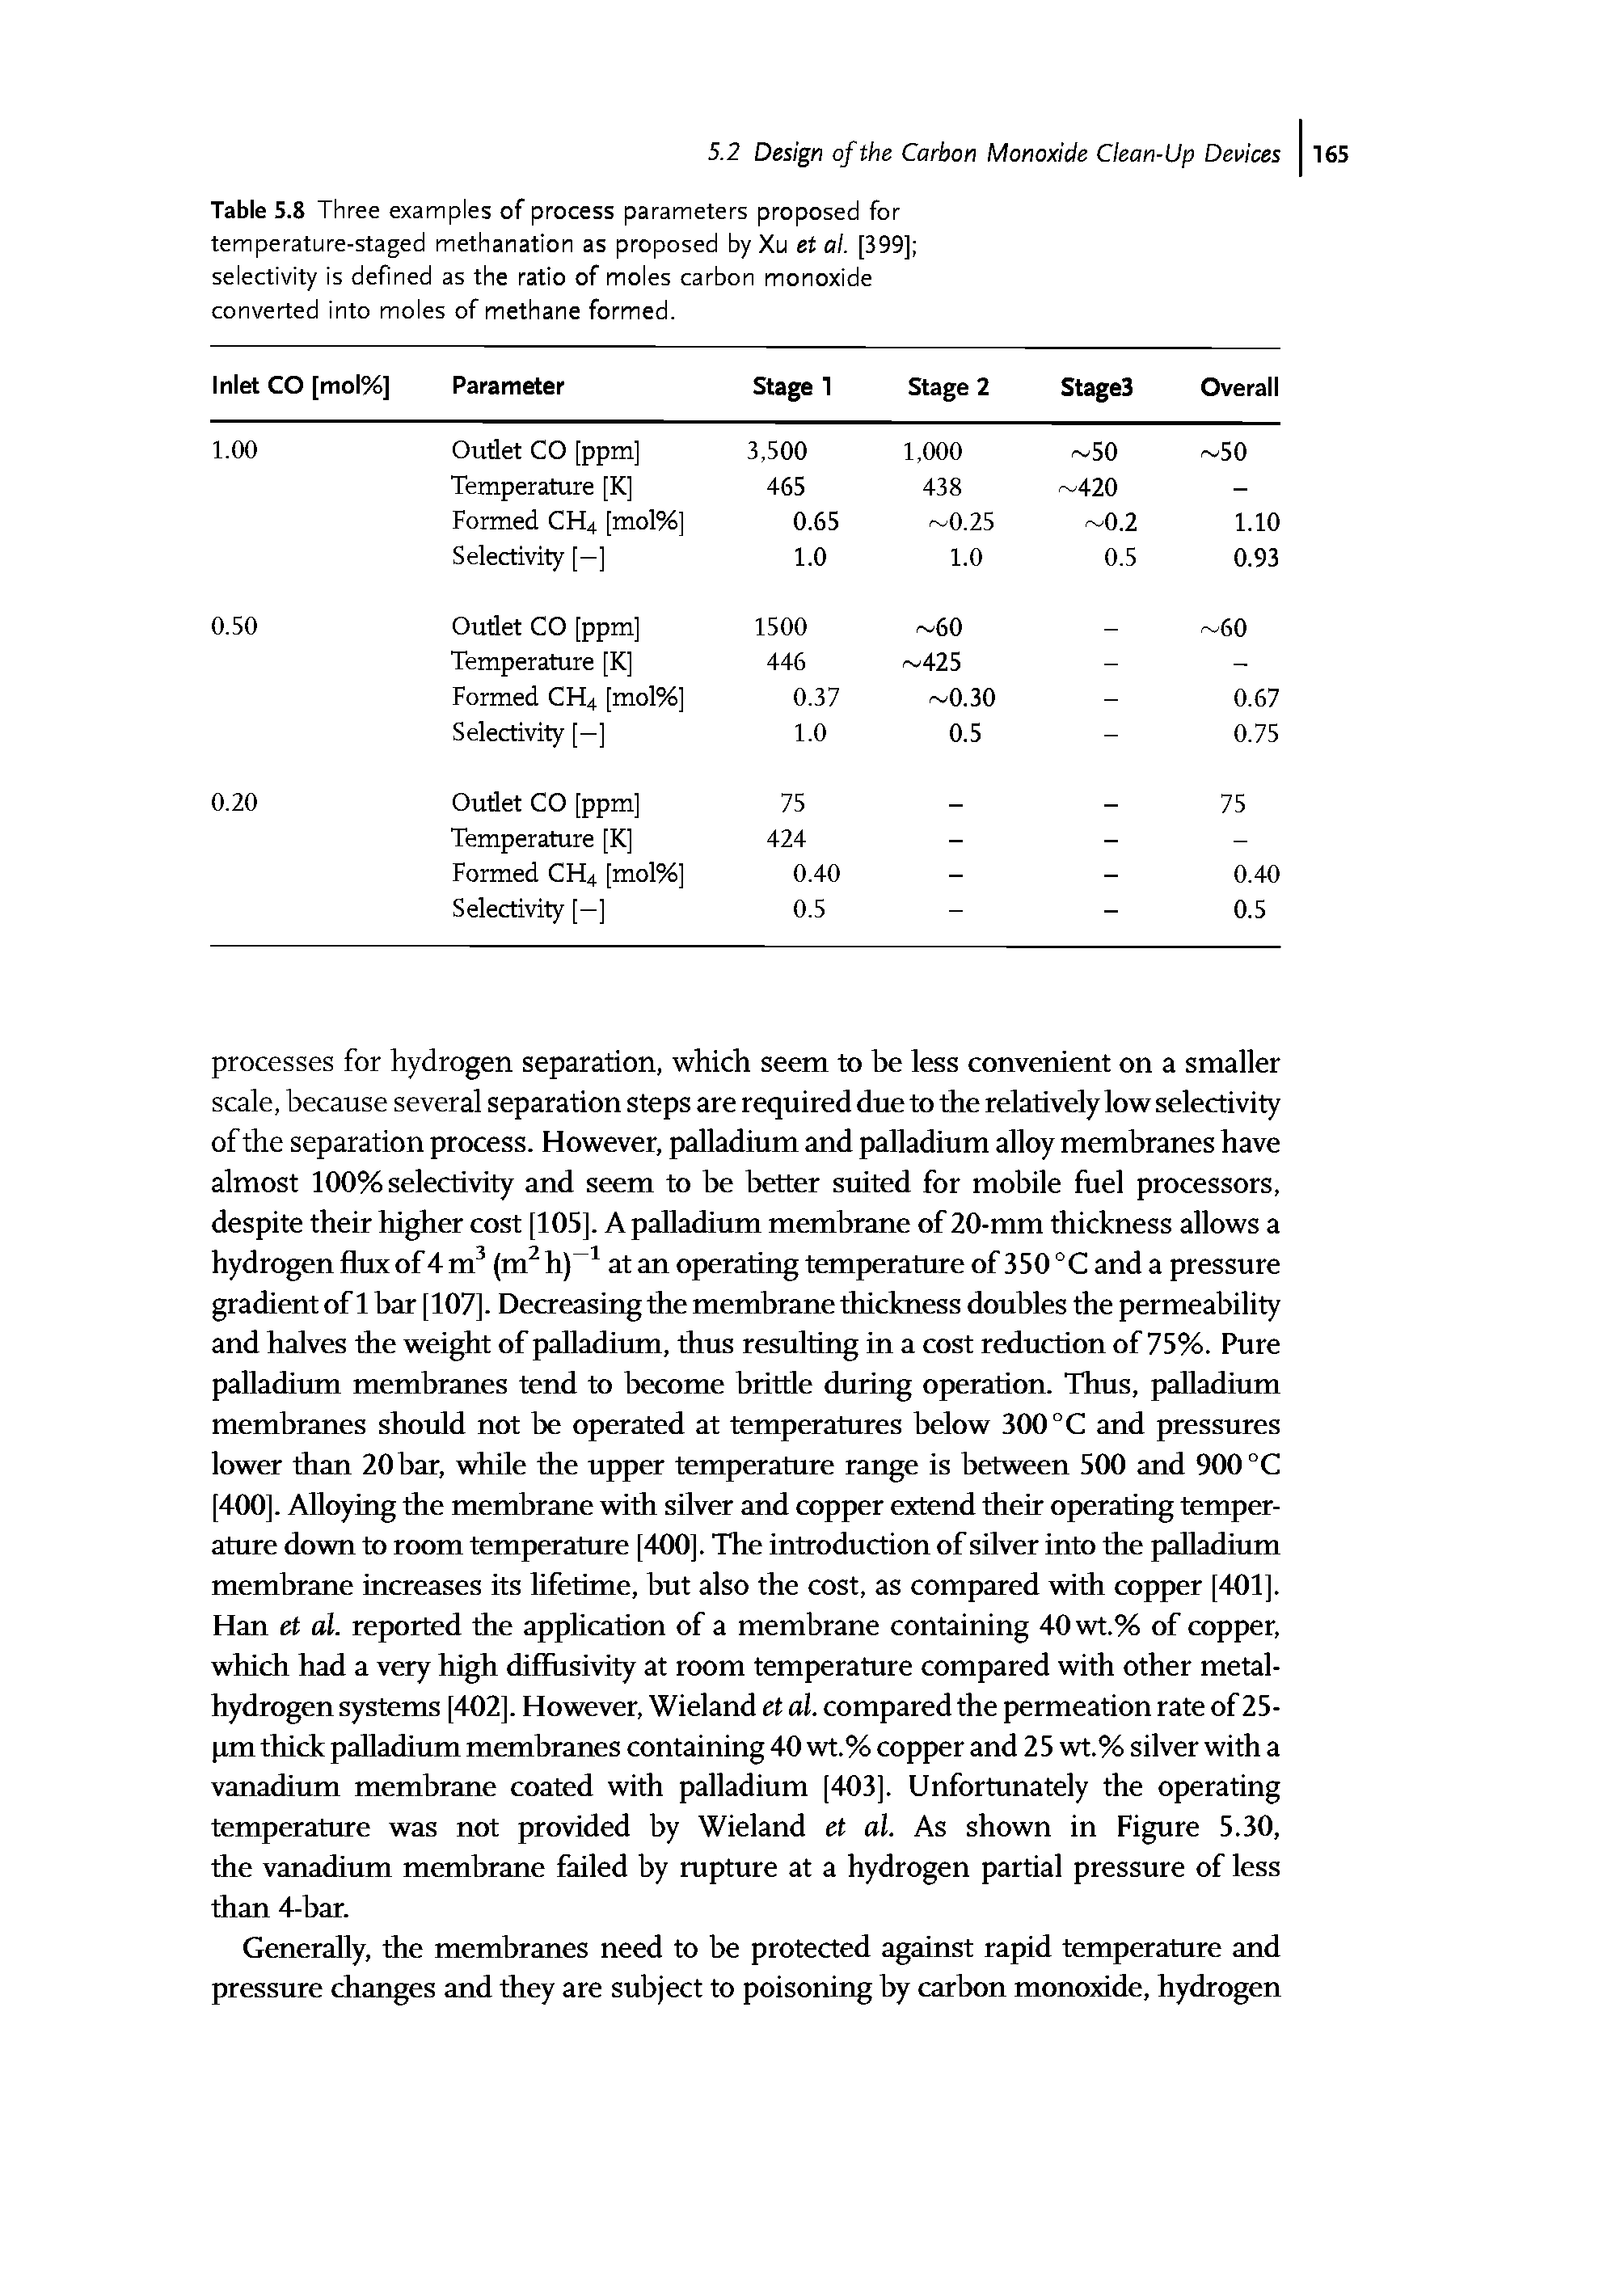 Table 5.8 Three examples of process parameters proposed for temperature-staged methanation as proposed by Xu et ai. [399] selectivity is defined as the ratio of moles carbon monoxide converted into moles of methane formed.